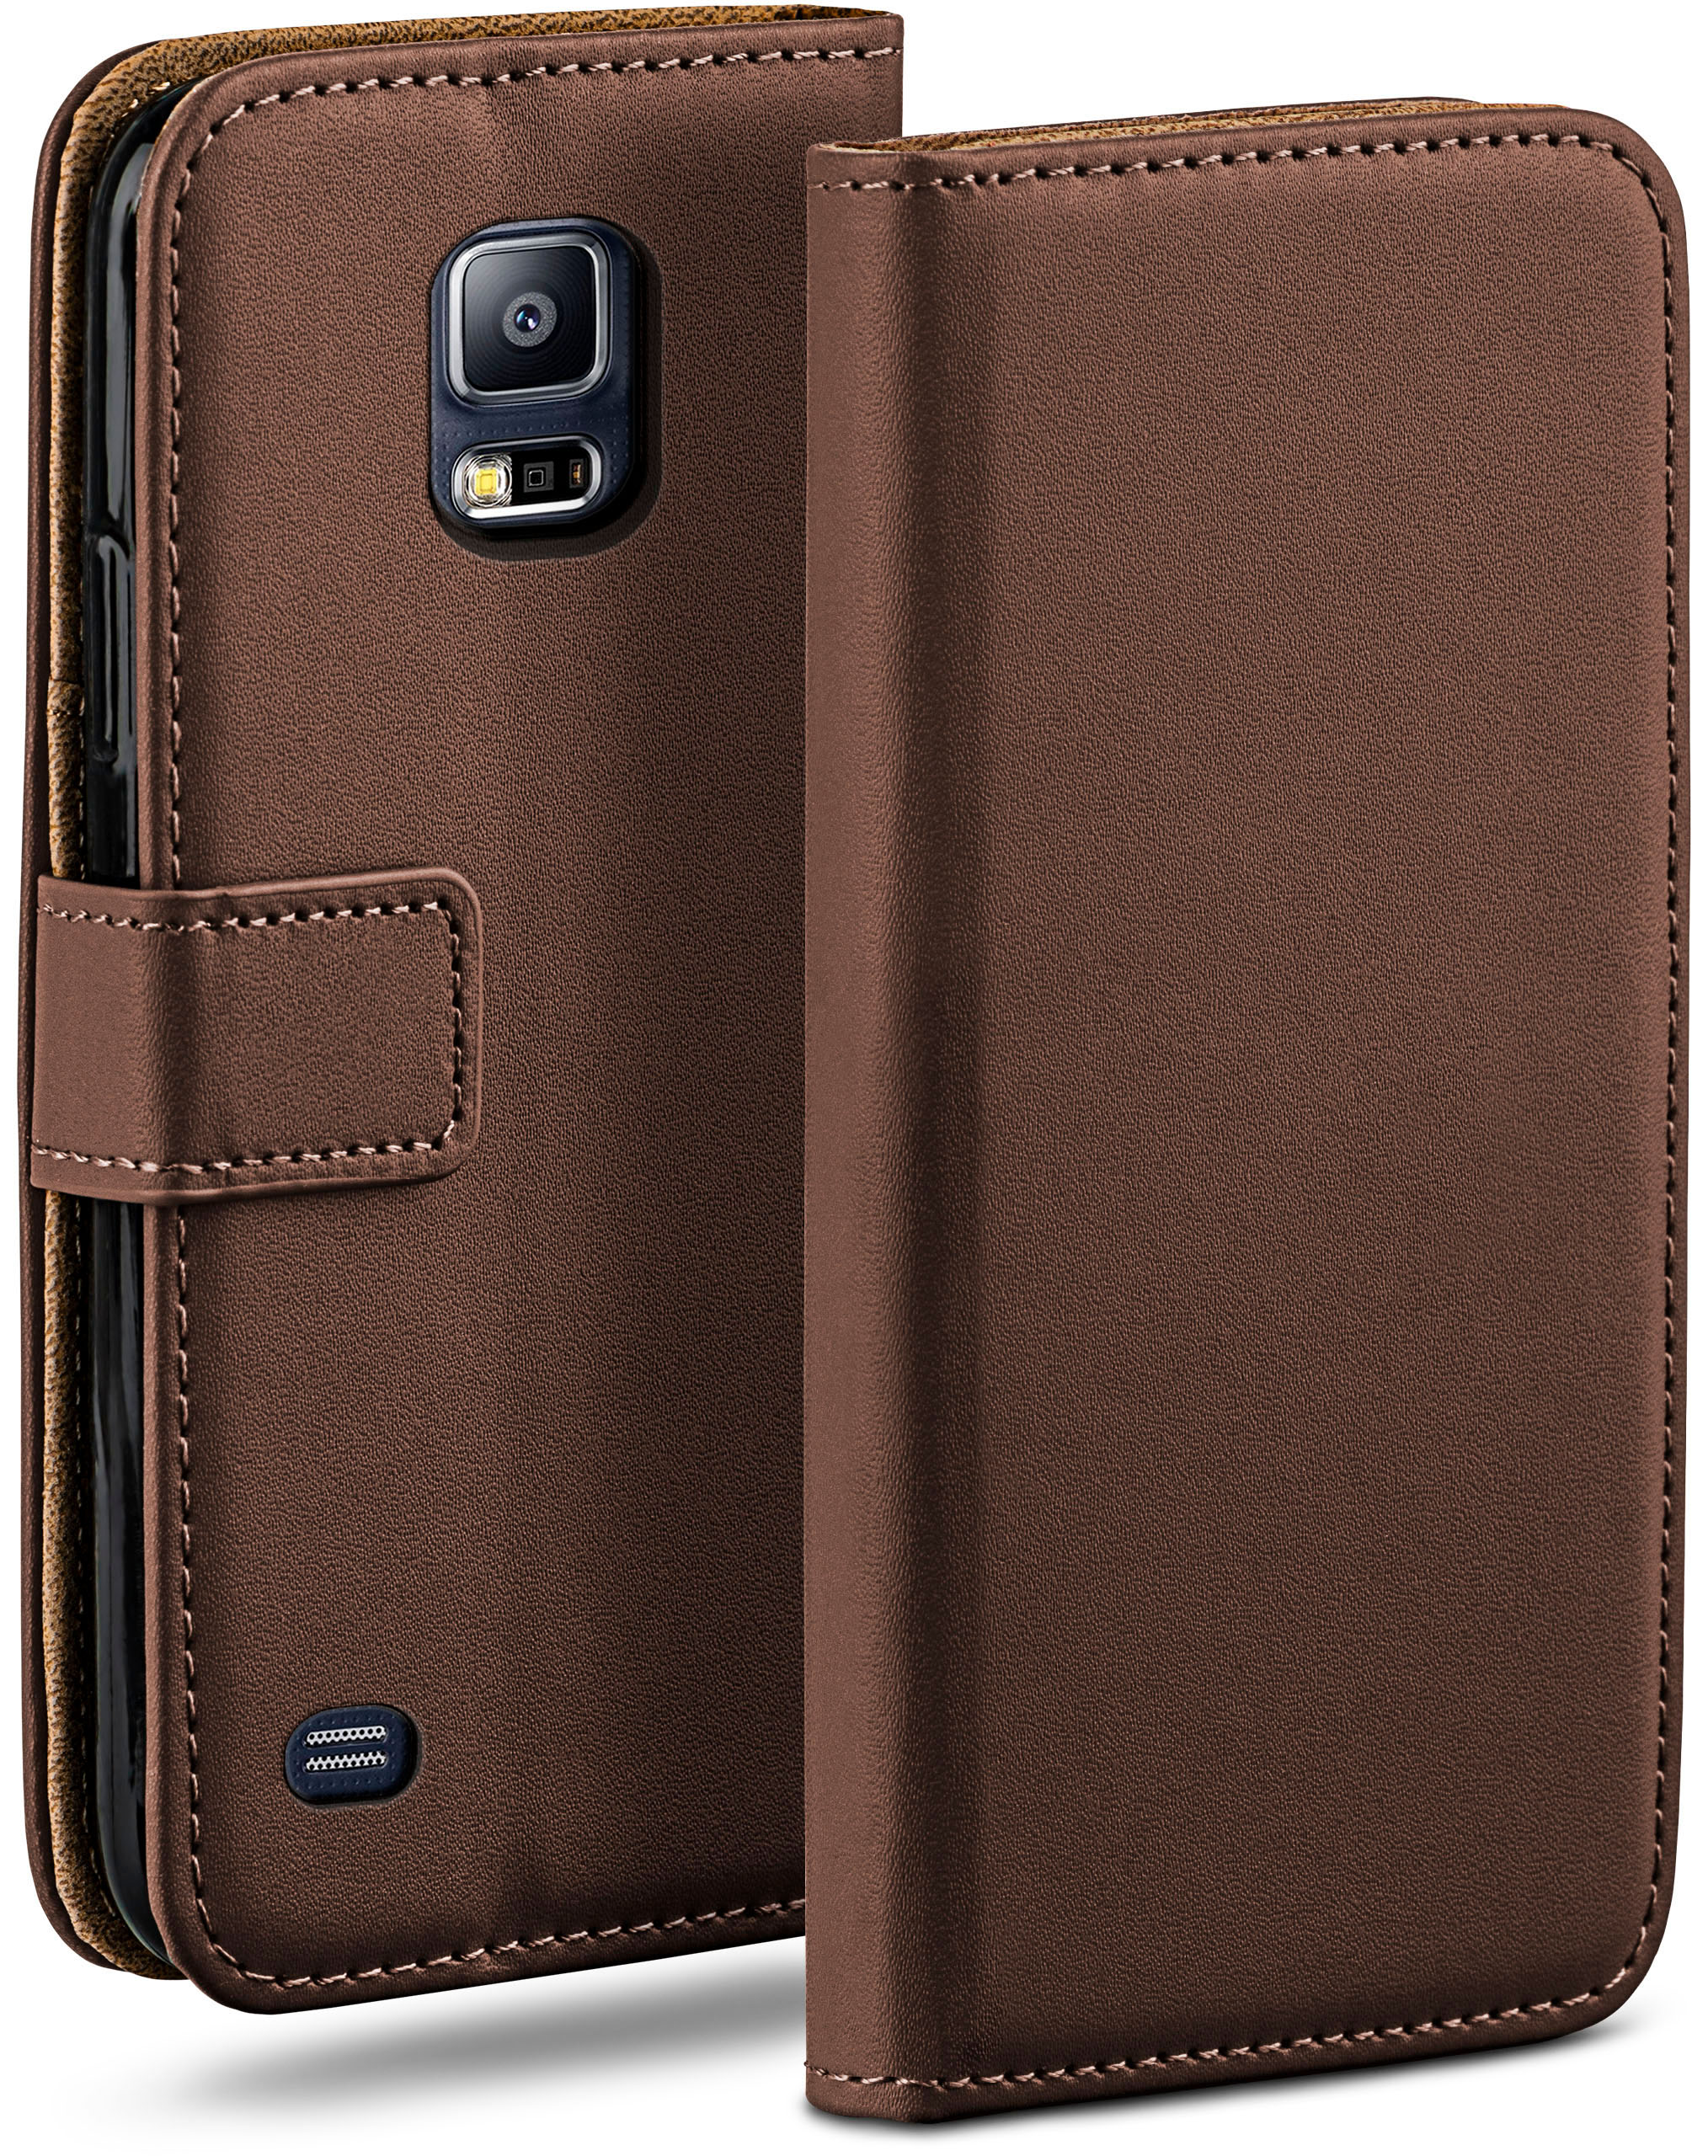 Galaxy S5 Book Neo, S5 Case, Bookcover, Samsung, Oxide-Brown / MOEX